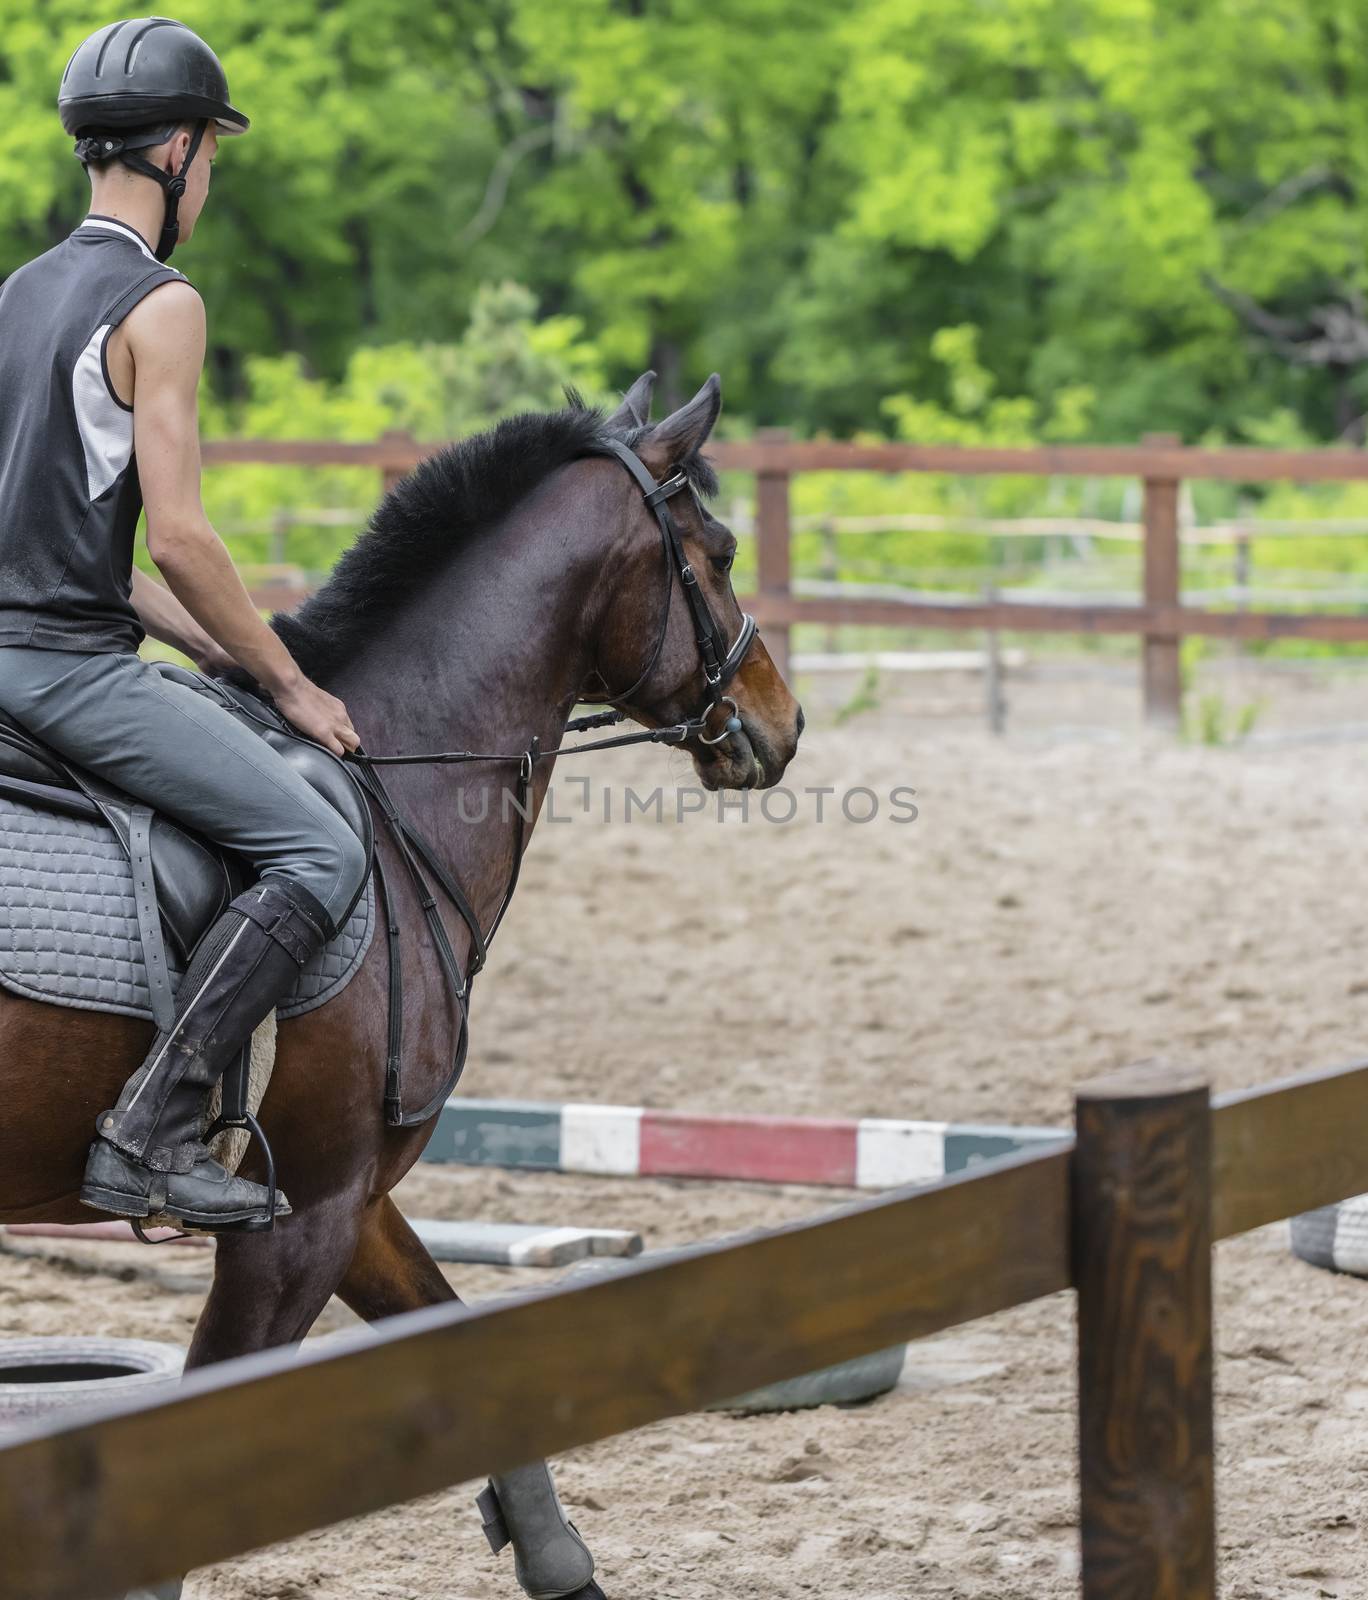 male athlete rides on horse, exercise outdoors